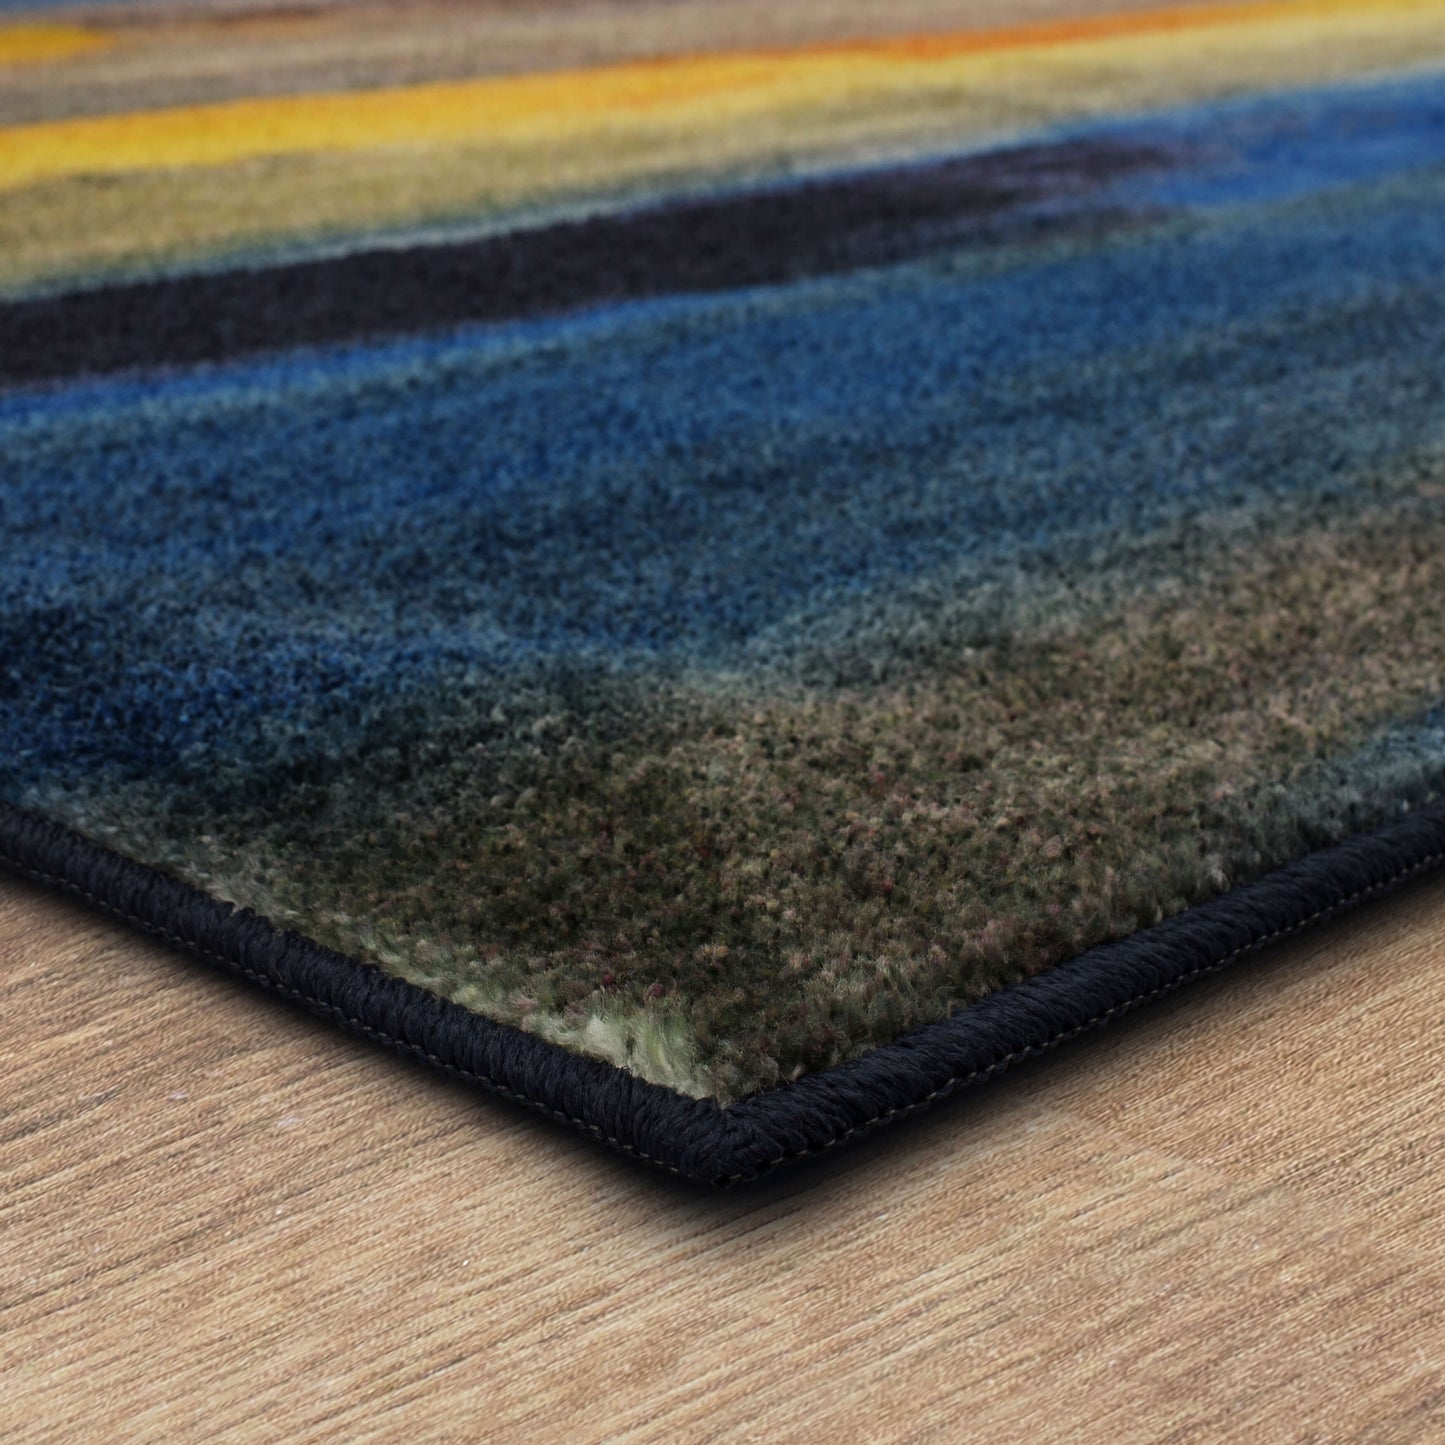 Technicolor Washed Blue & Yellow Area Rug